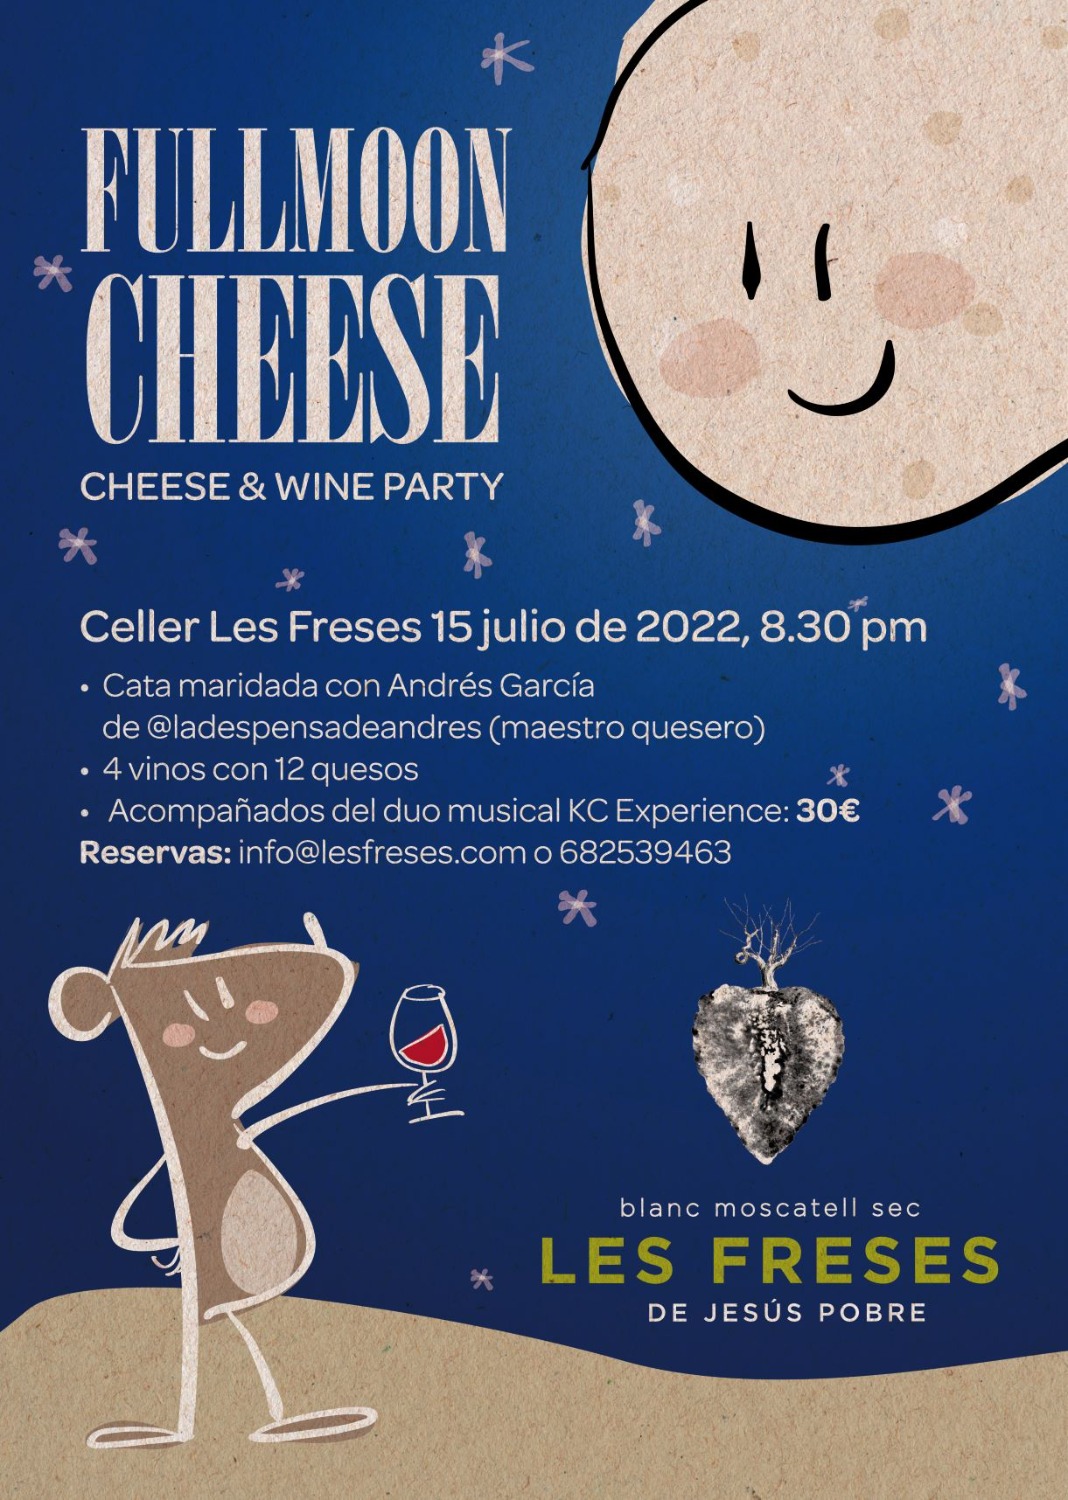 FULLMOON CHEESE PARTY  tasting 4 wines + 12 cheeses + músic 15 JULY 8.30 pm